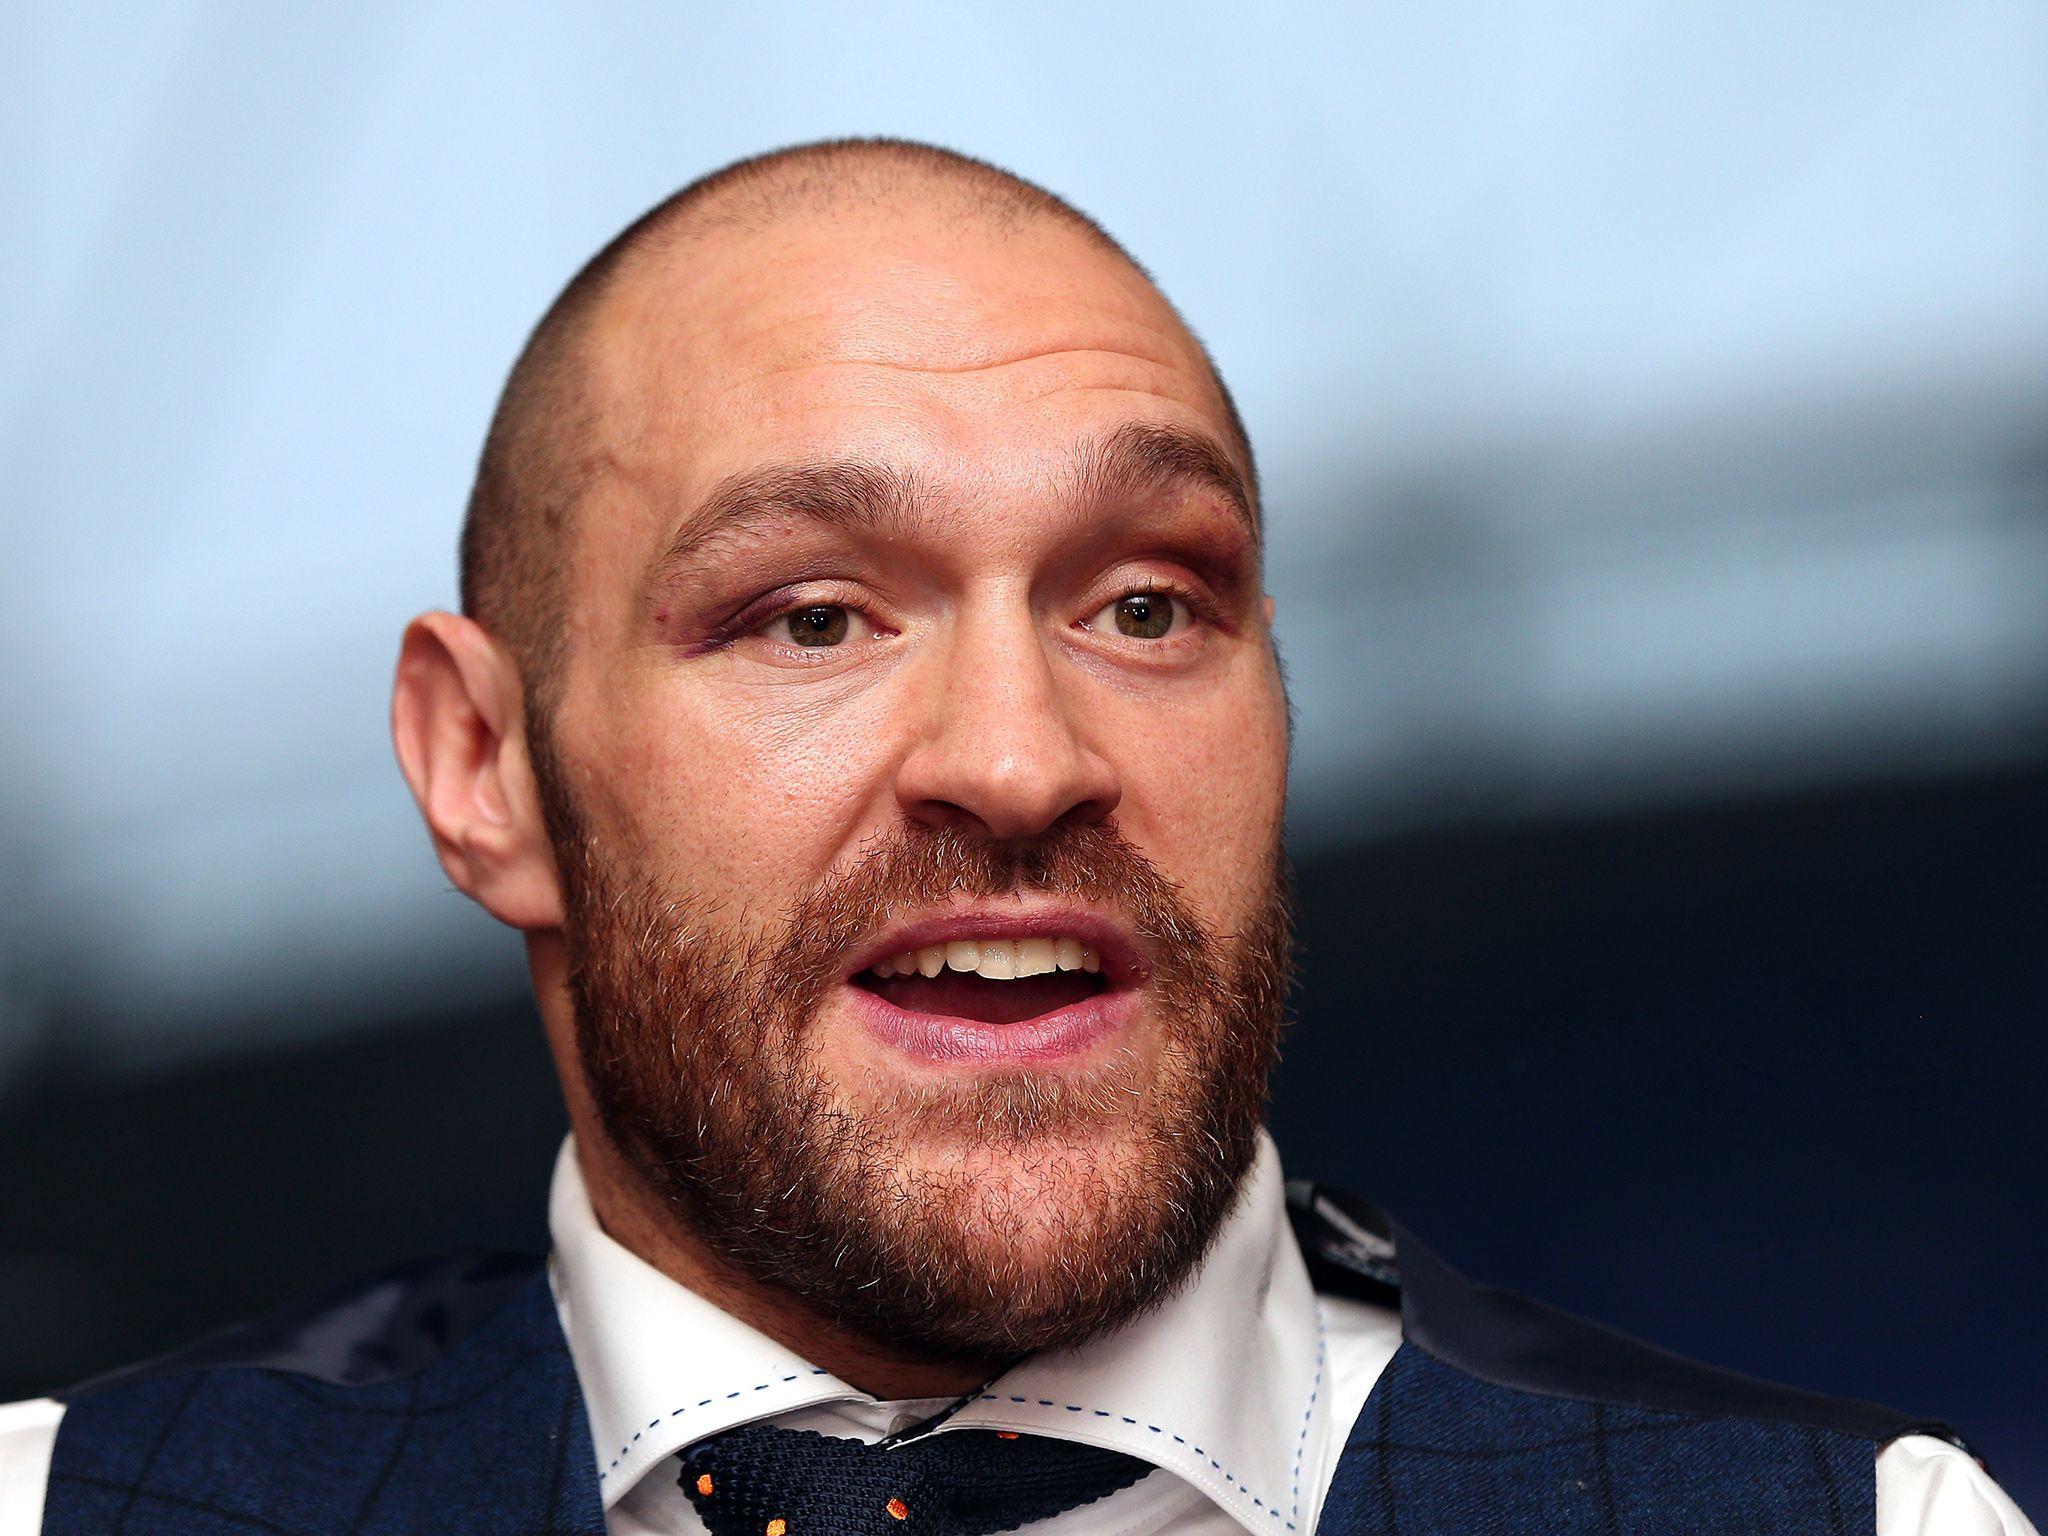 Anthony Joshua will face Tyson Fury under two conditions